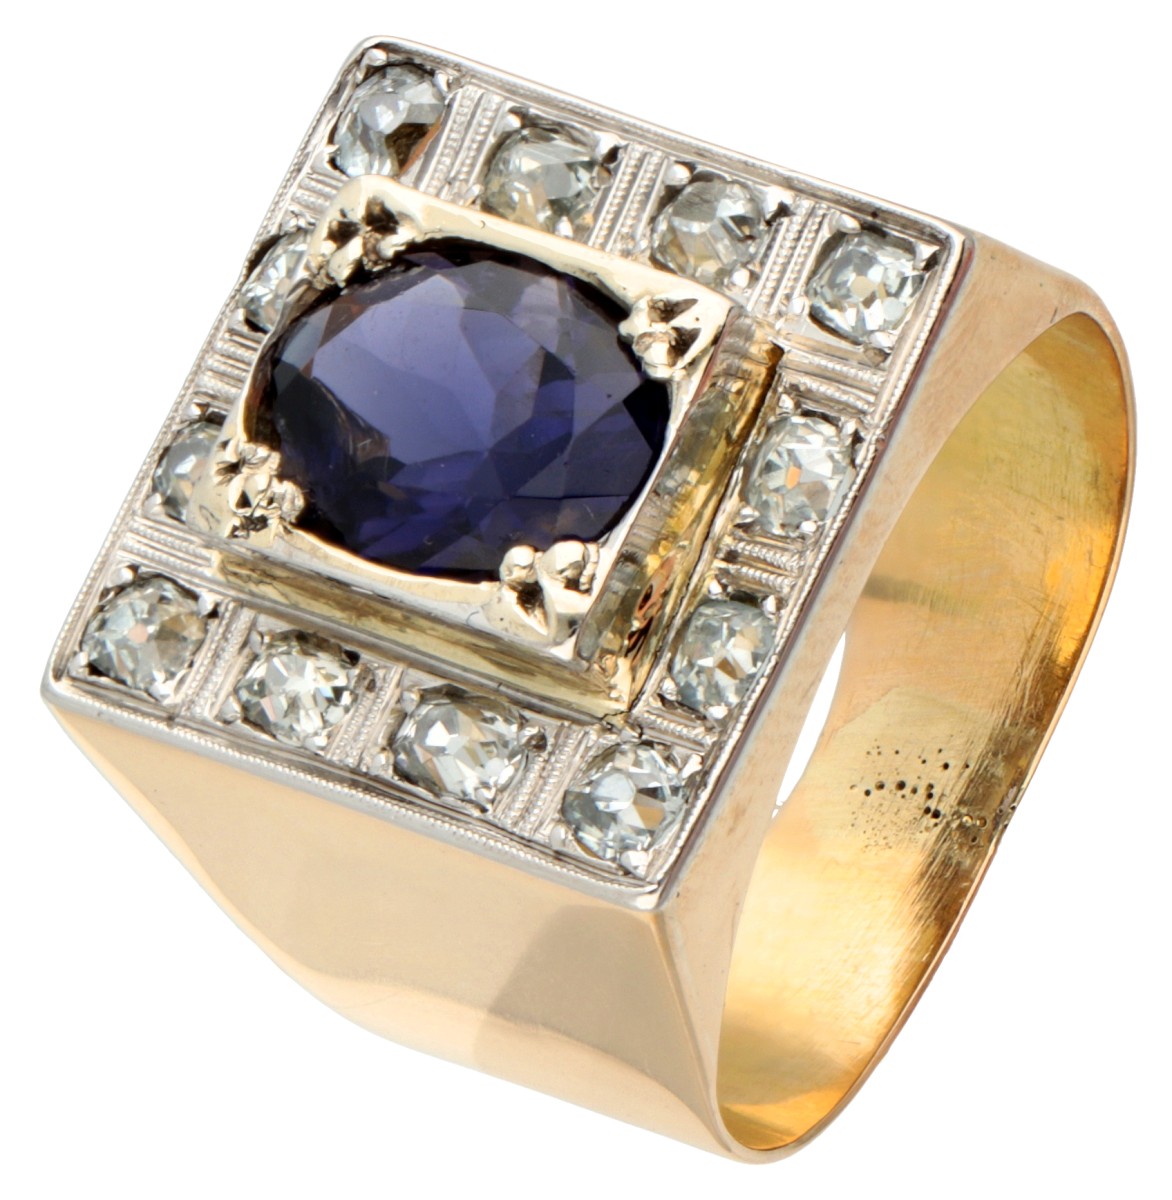 Retro 14K. yellow gold ring set with approx. 1.40 ct. iolite and approx. 0.72 ct. diamond.